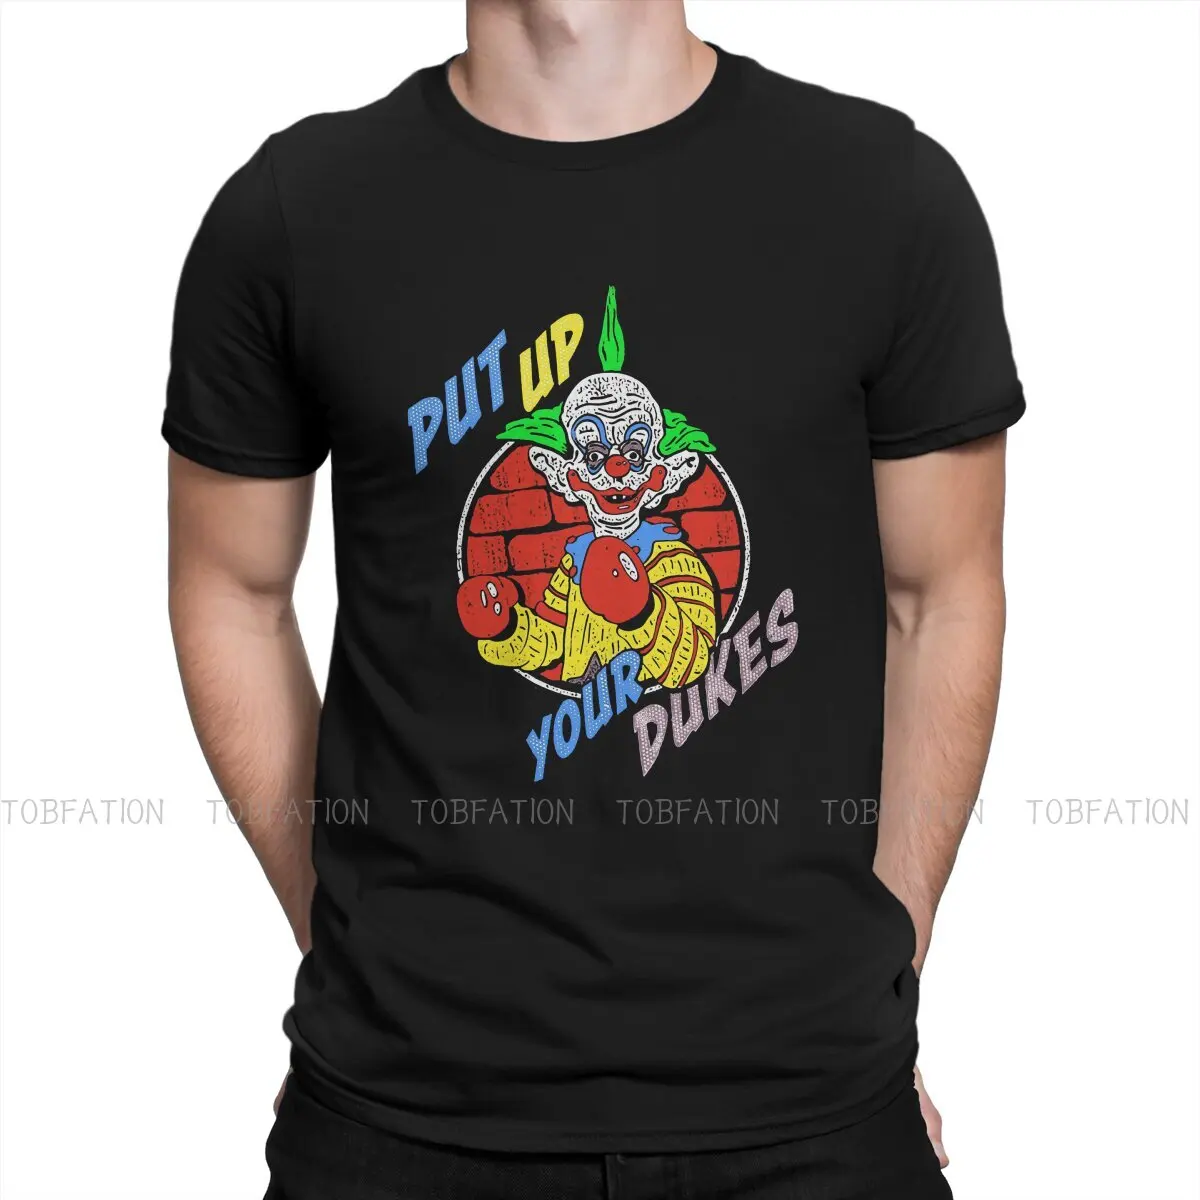 Killer Klowns from Outer Space Sci-fi Movie Put Up Your Dukes Tshirt Vintage Men Alternative Teenager Blouses Tops Loose Cotton